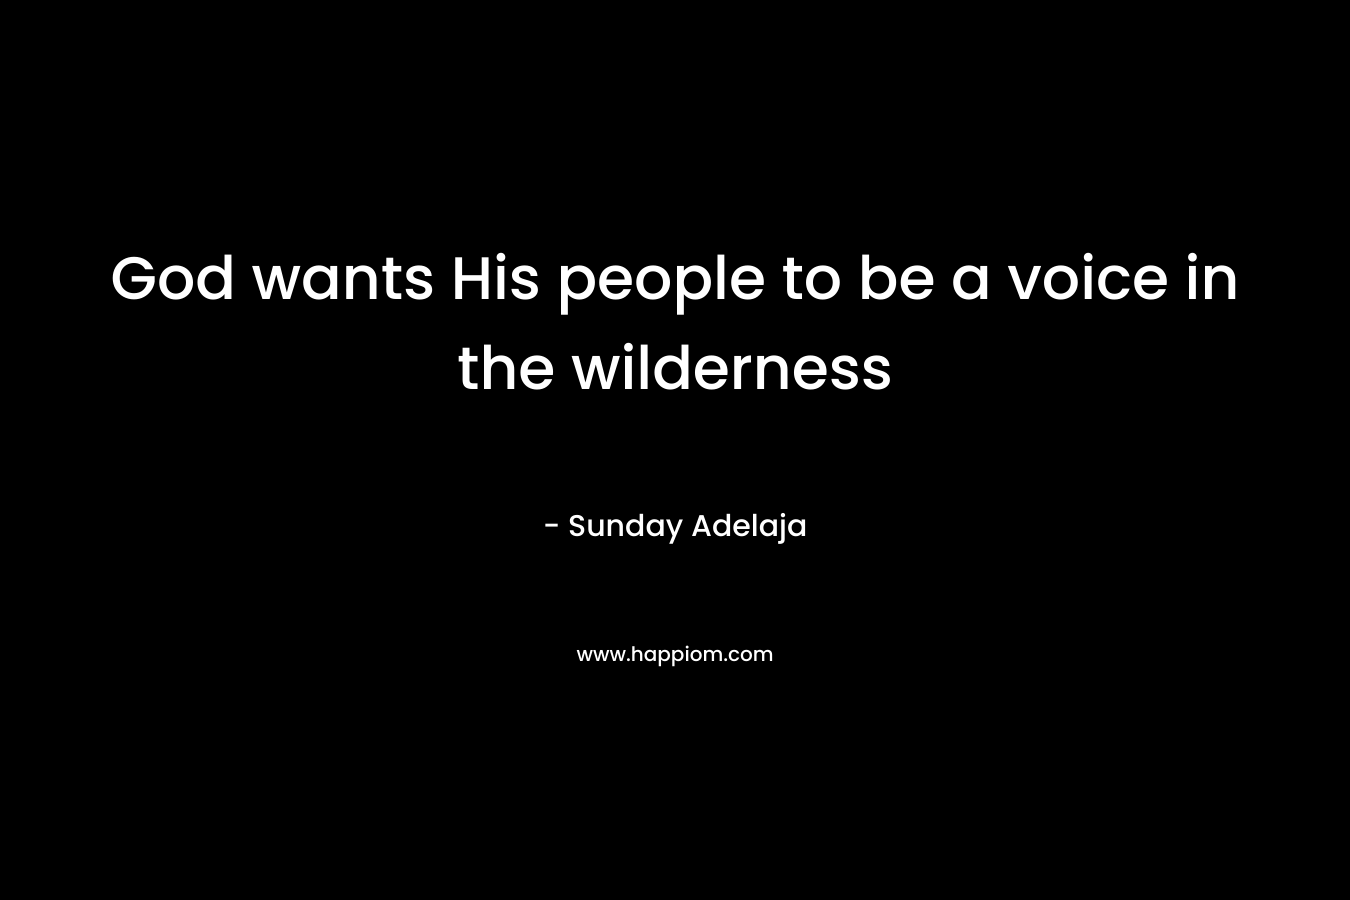 God wants His people to be a voice in the wilderness